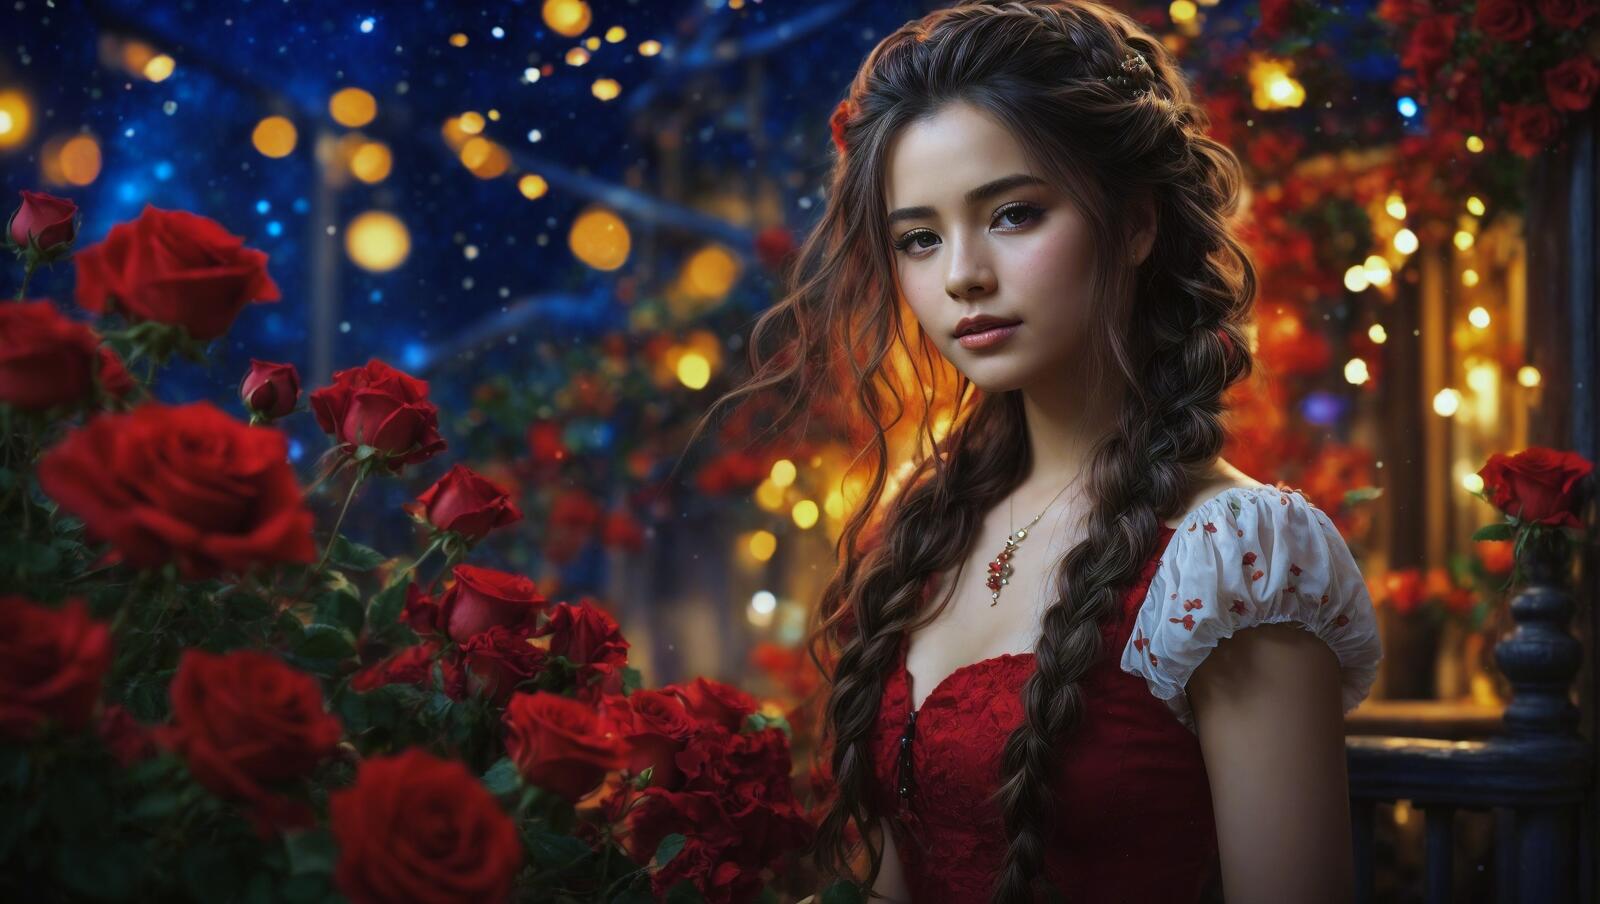 Free photo Beautiful girl holding roses in her hand